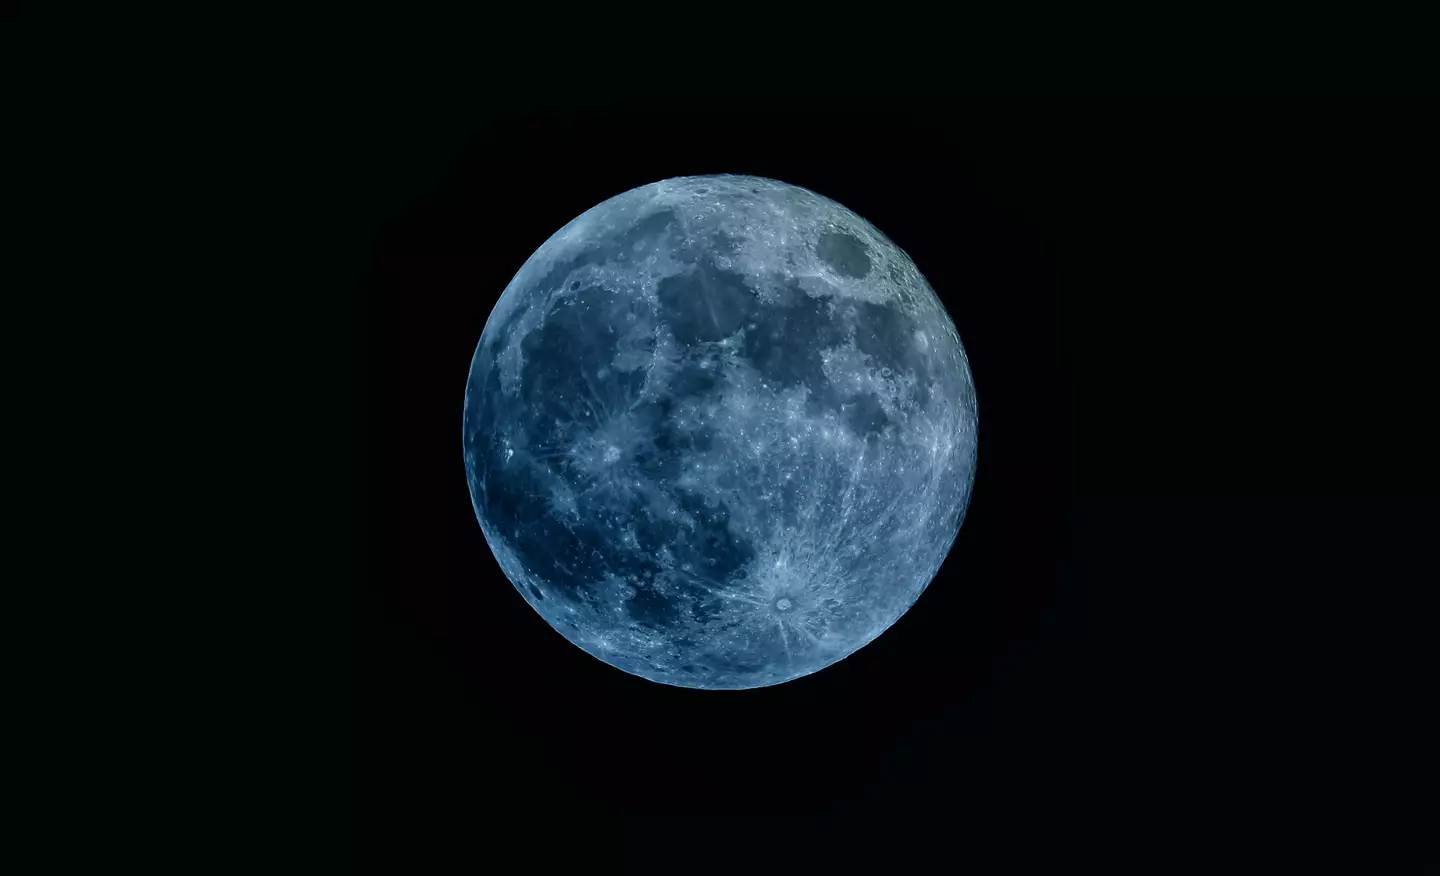 The 'Blue Supermoon' will be visible in the sky this week.